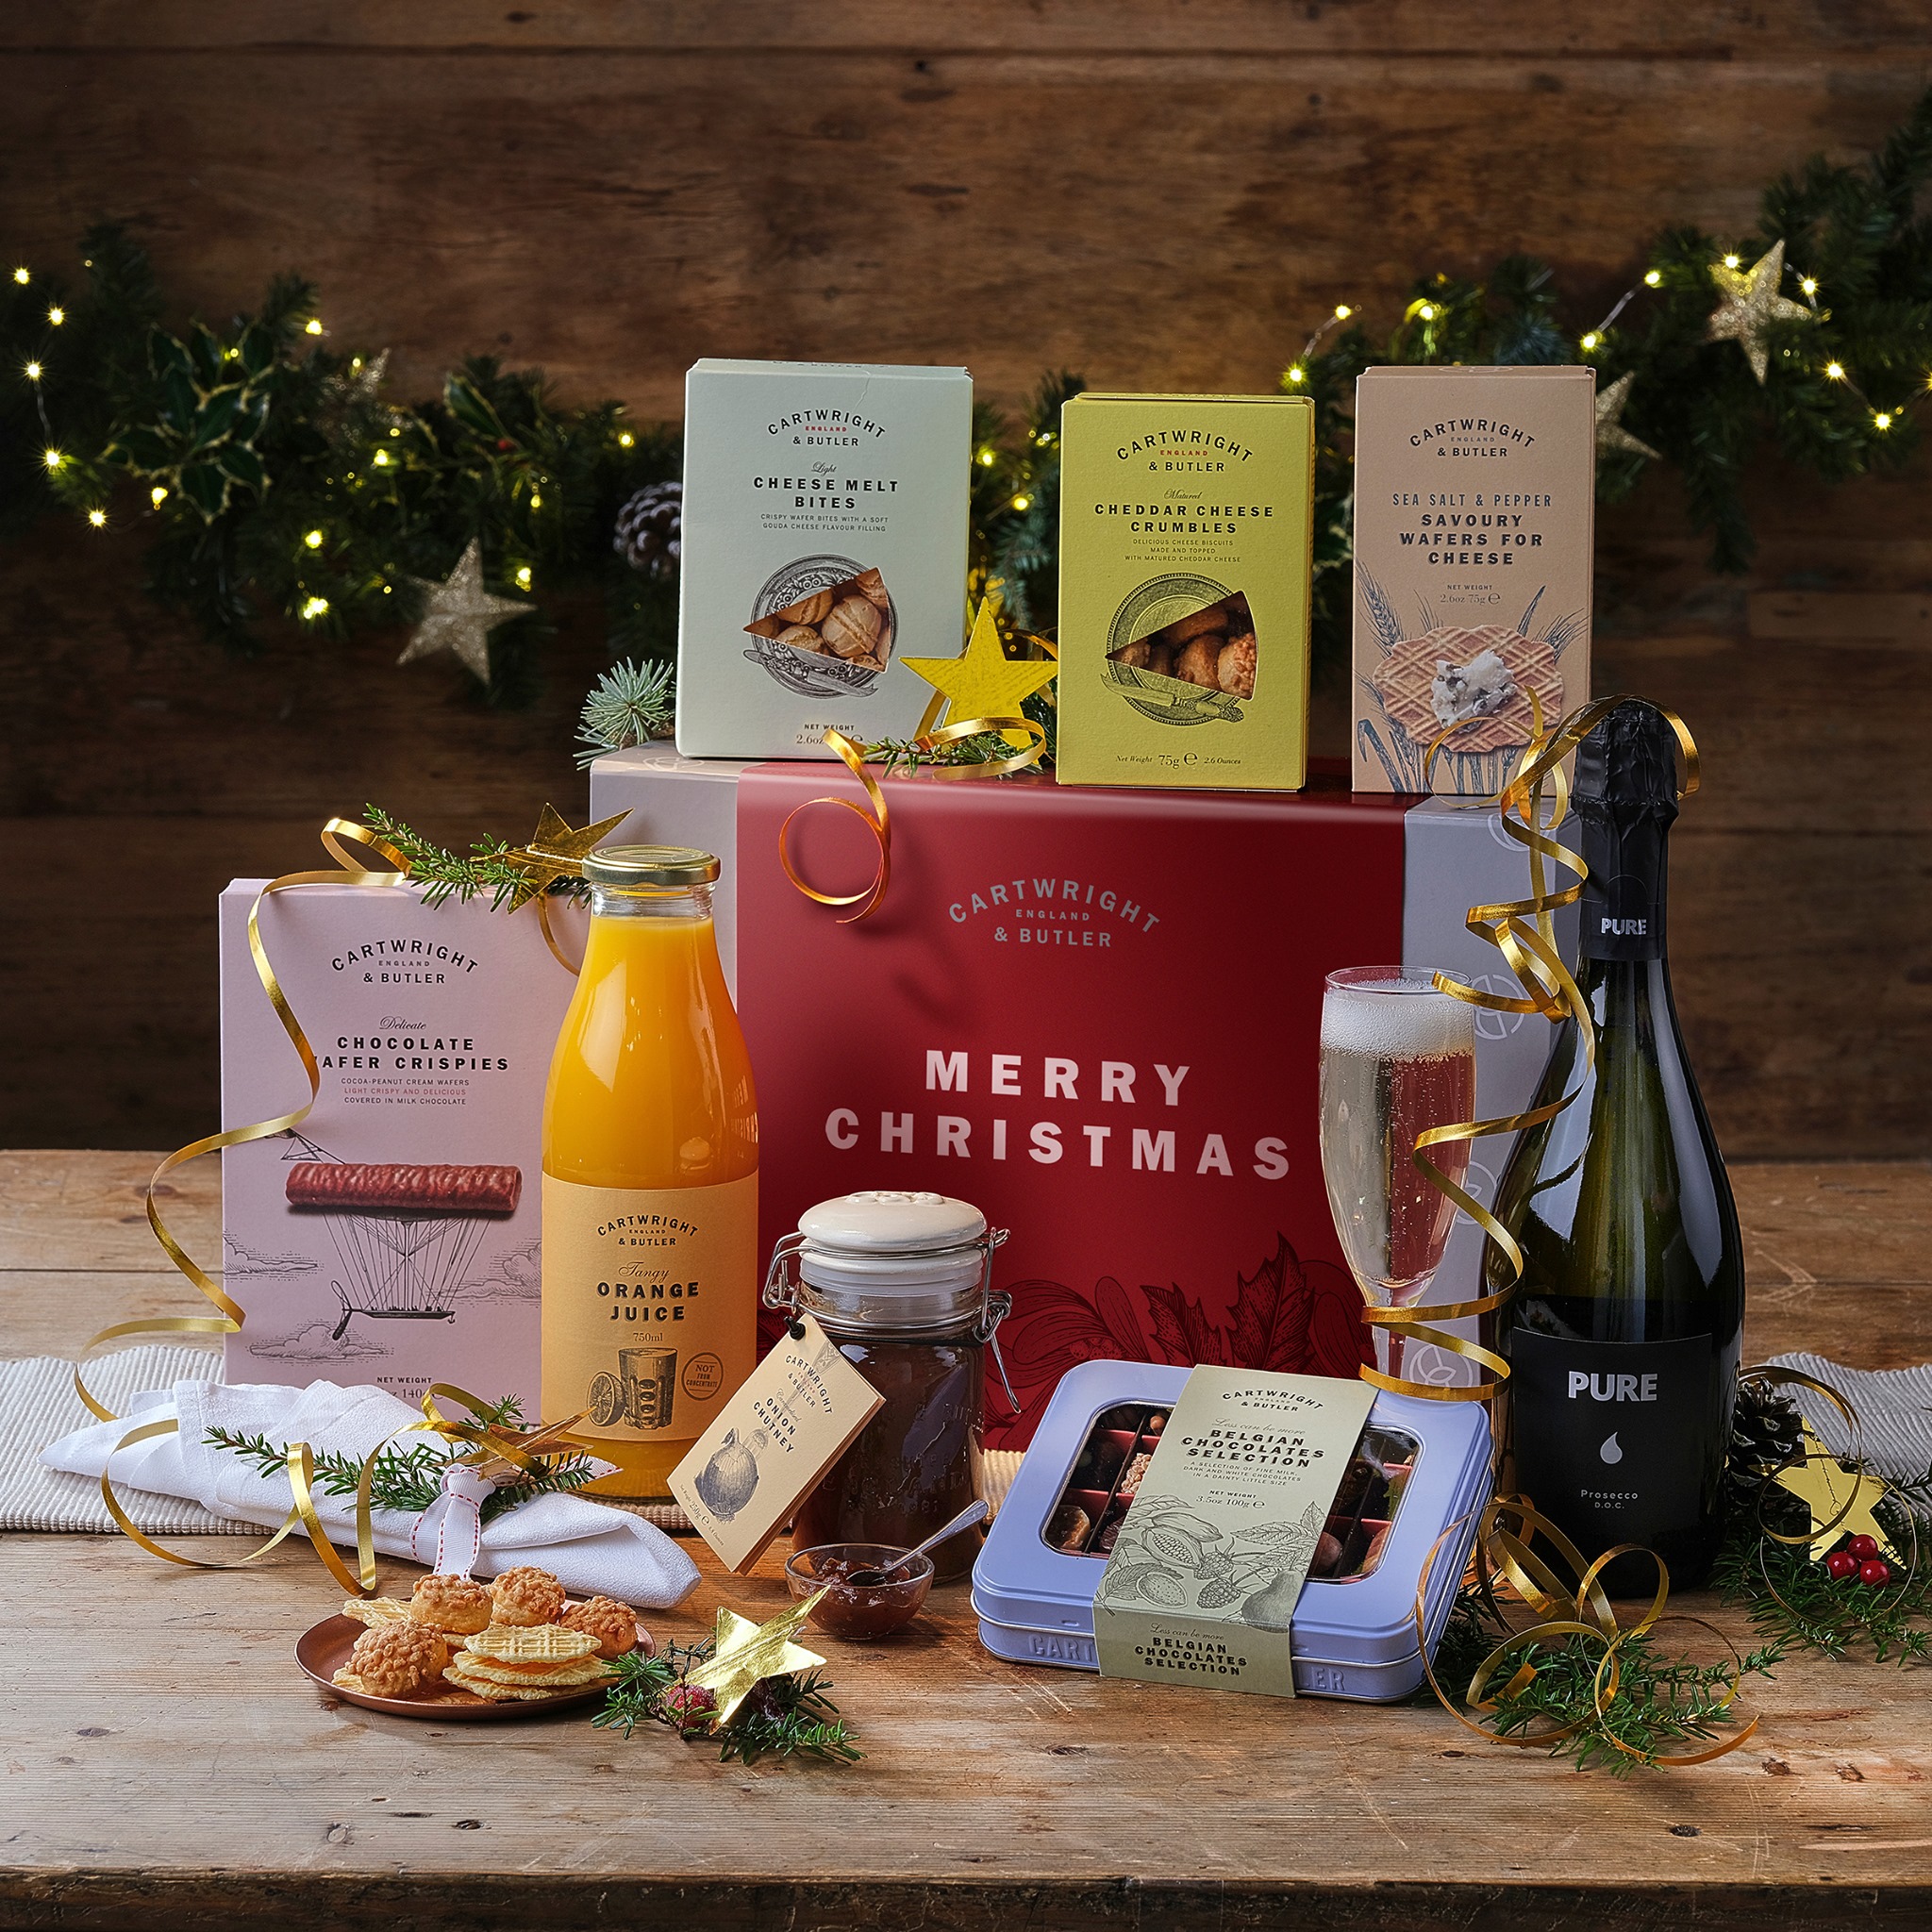 15 of the Best Christmas Food and Drink Hampers About Time Magazine